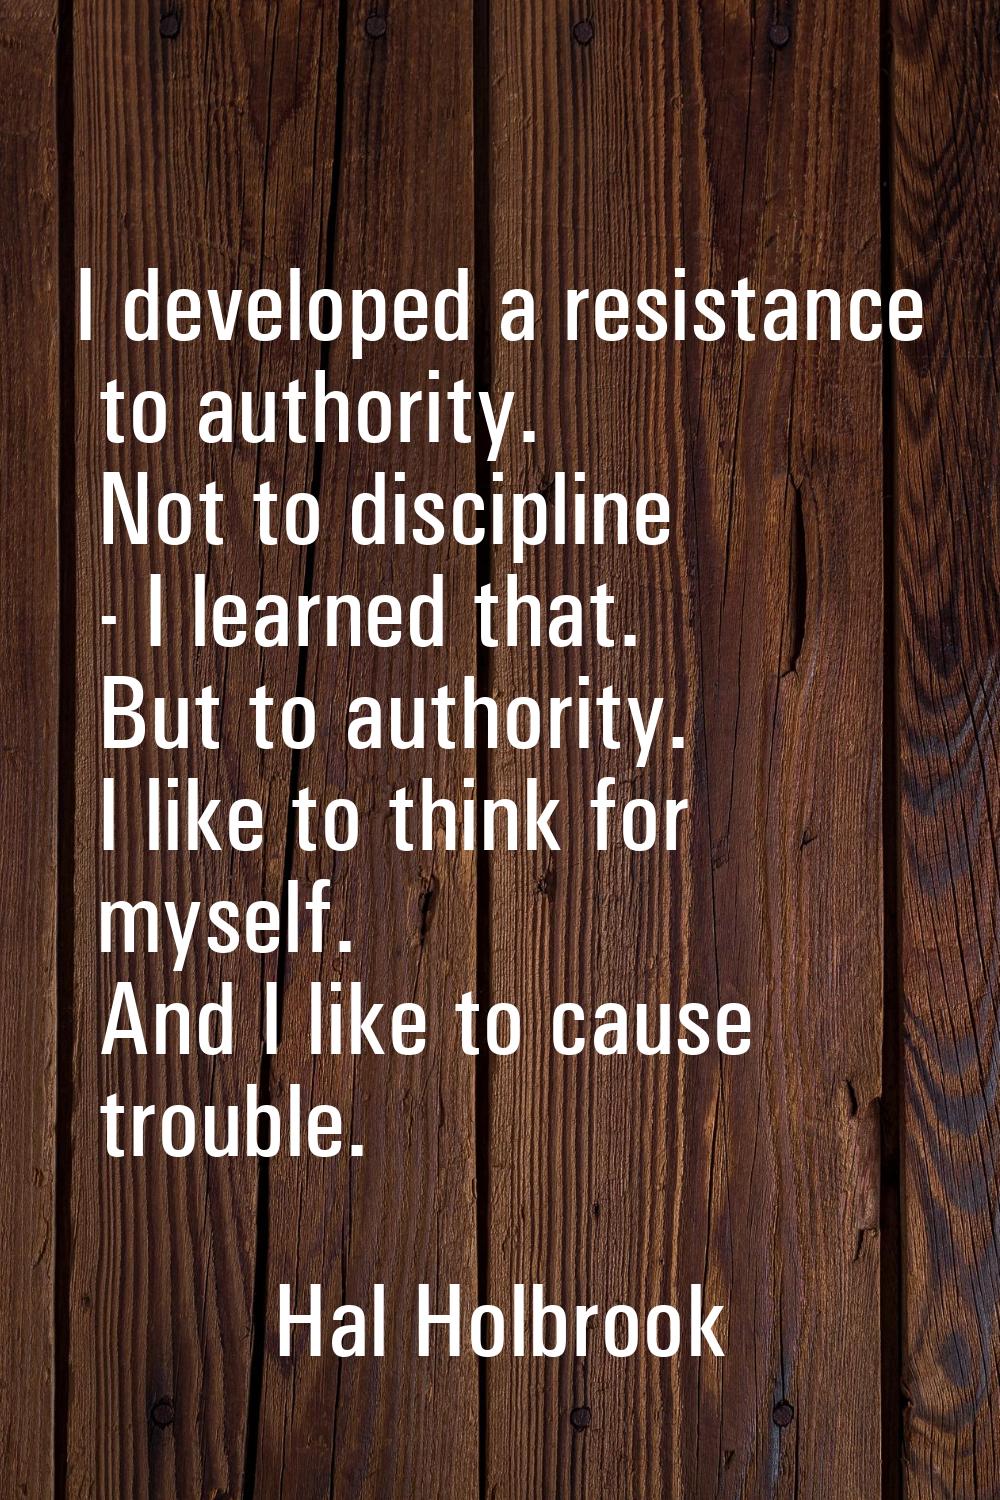 I developed a resistance to authority. Not to discipline - I learned that. But to authority. I like